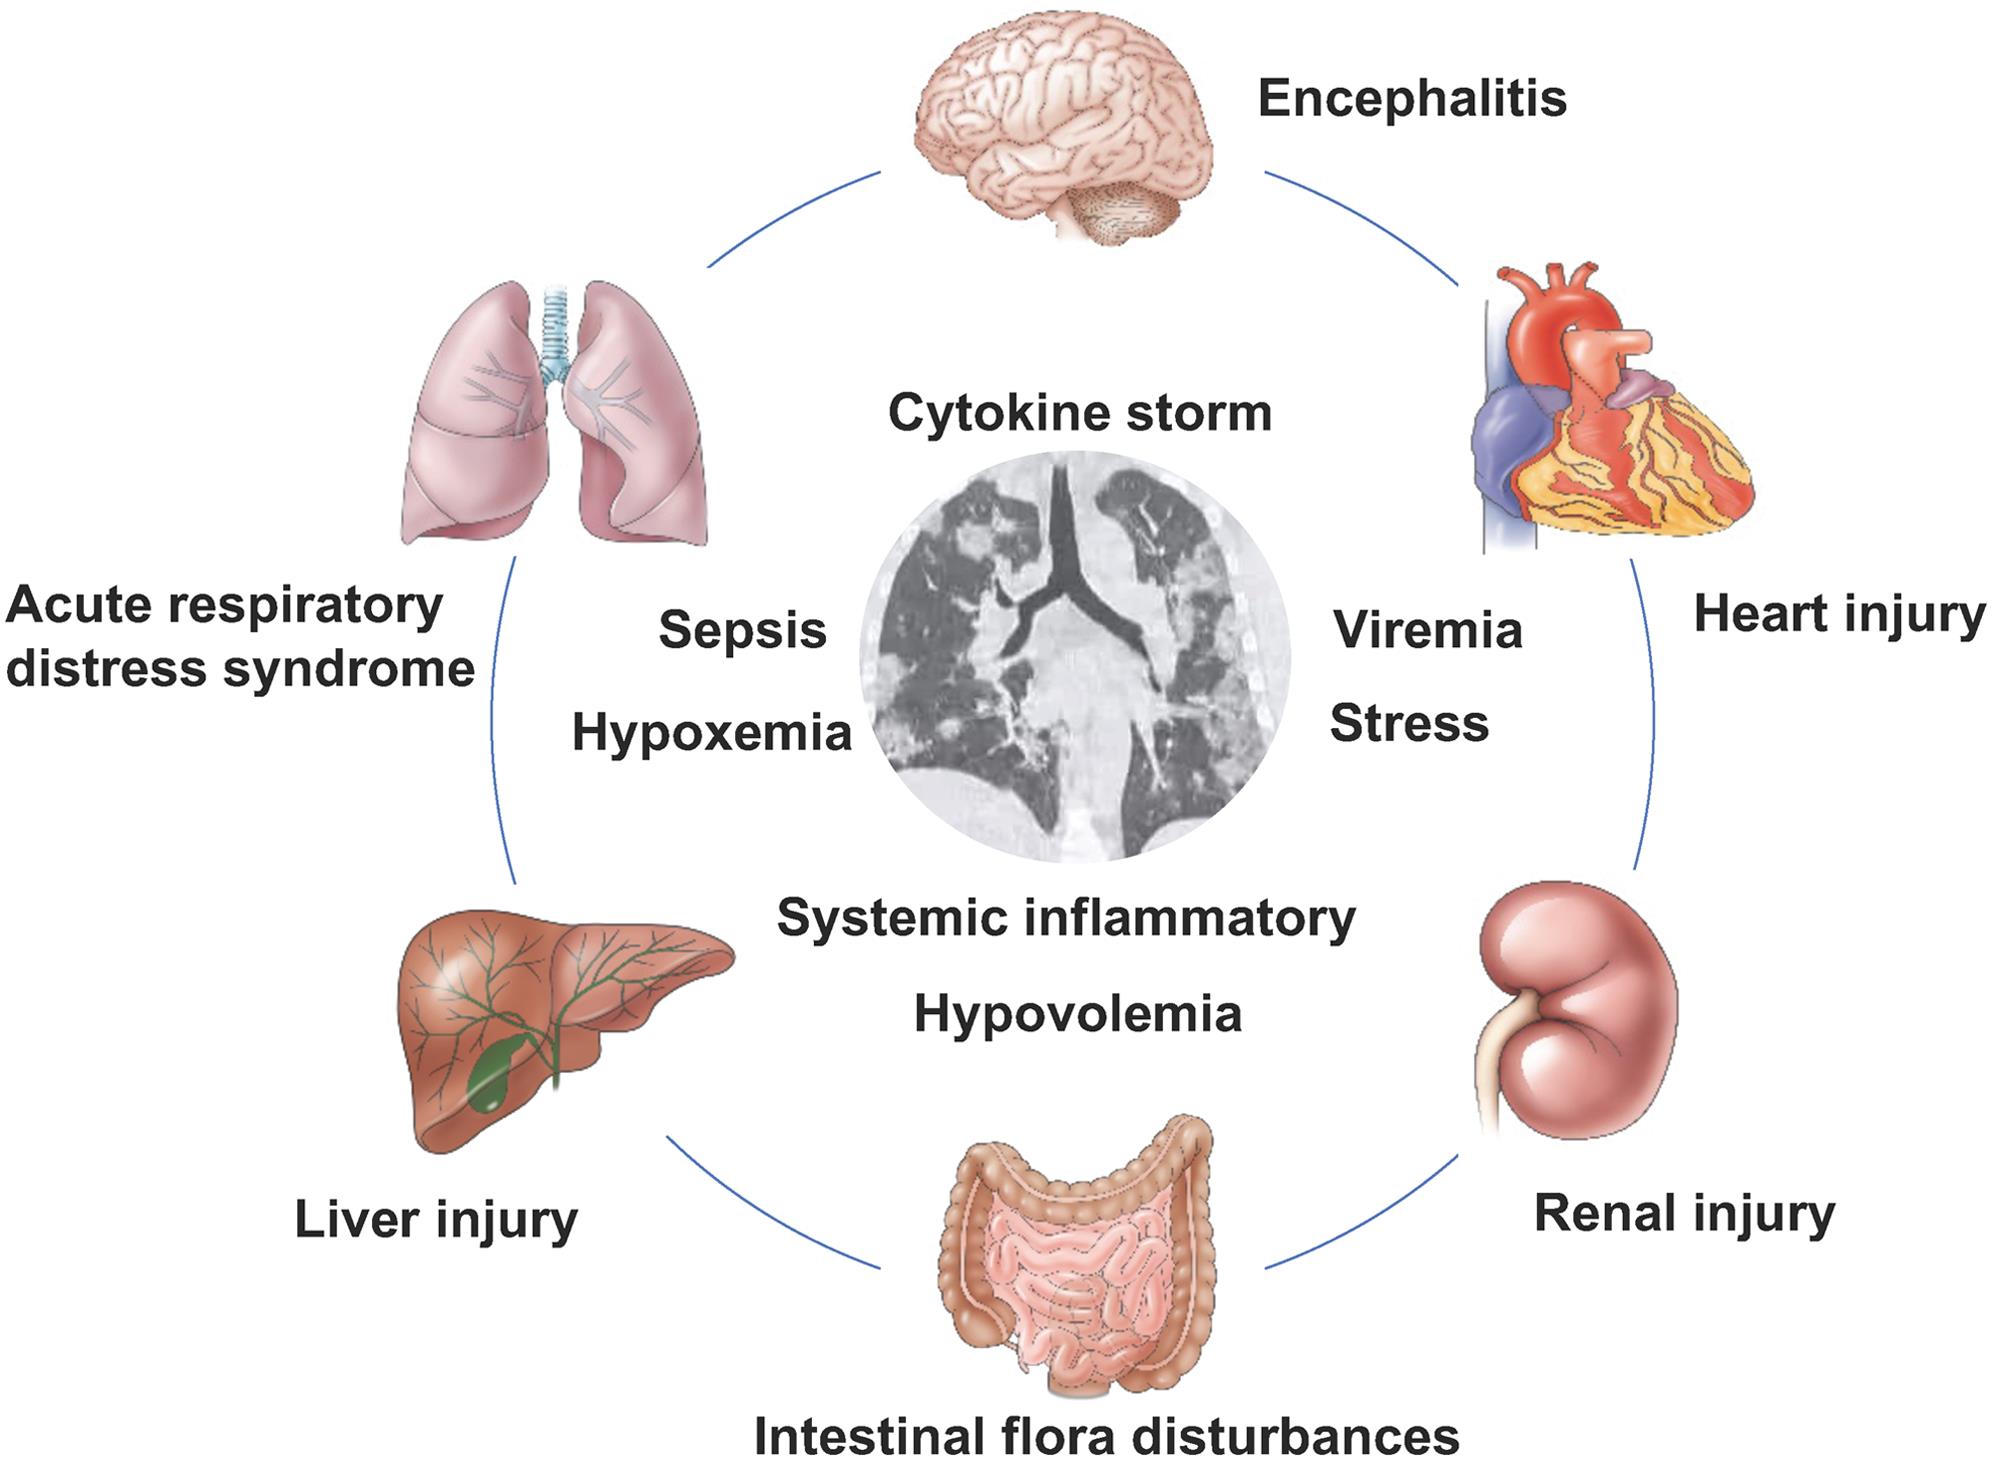 Complications and disease mechanisms in patients with 2019 coronavirus infection.